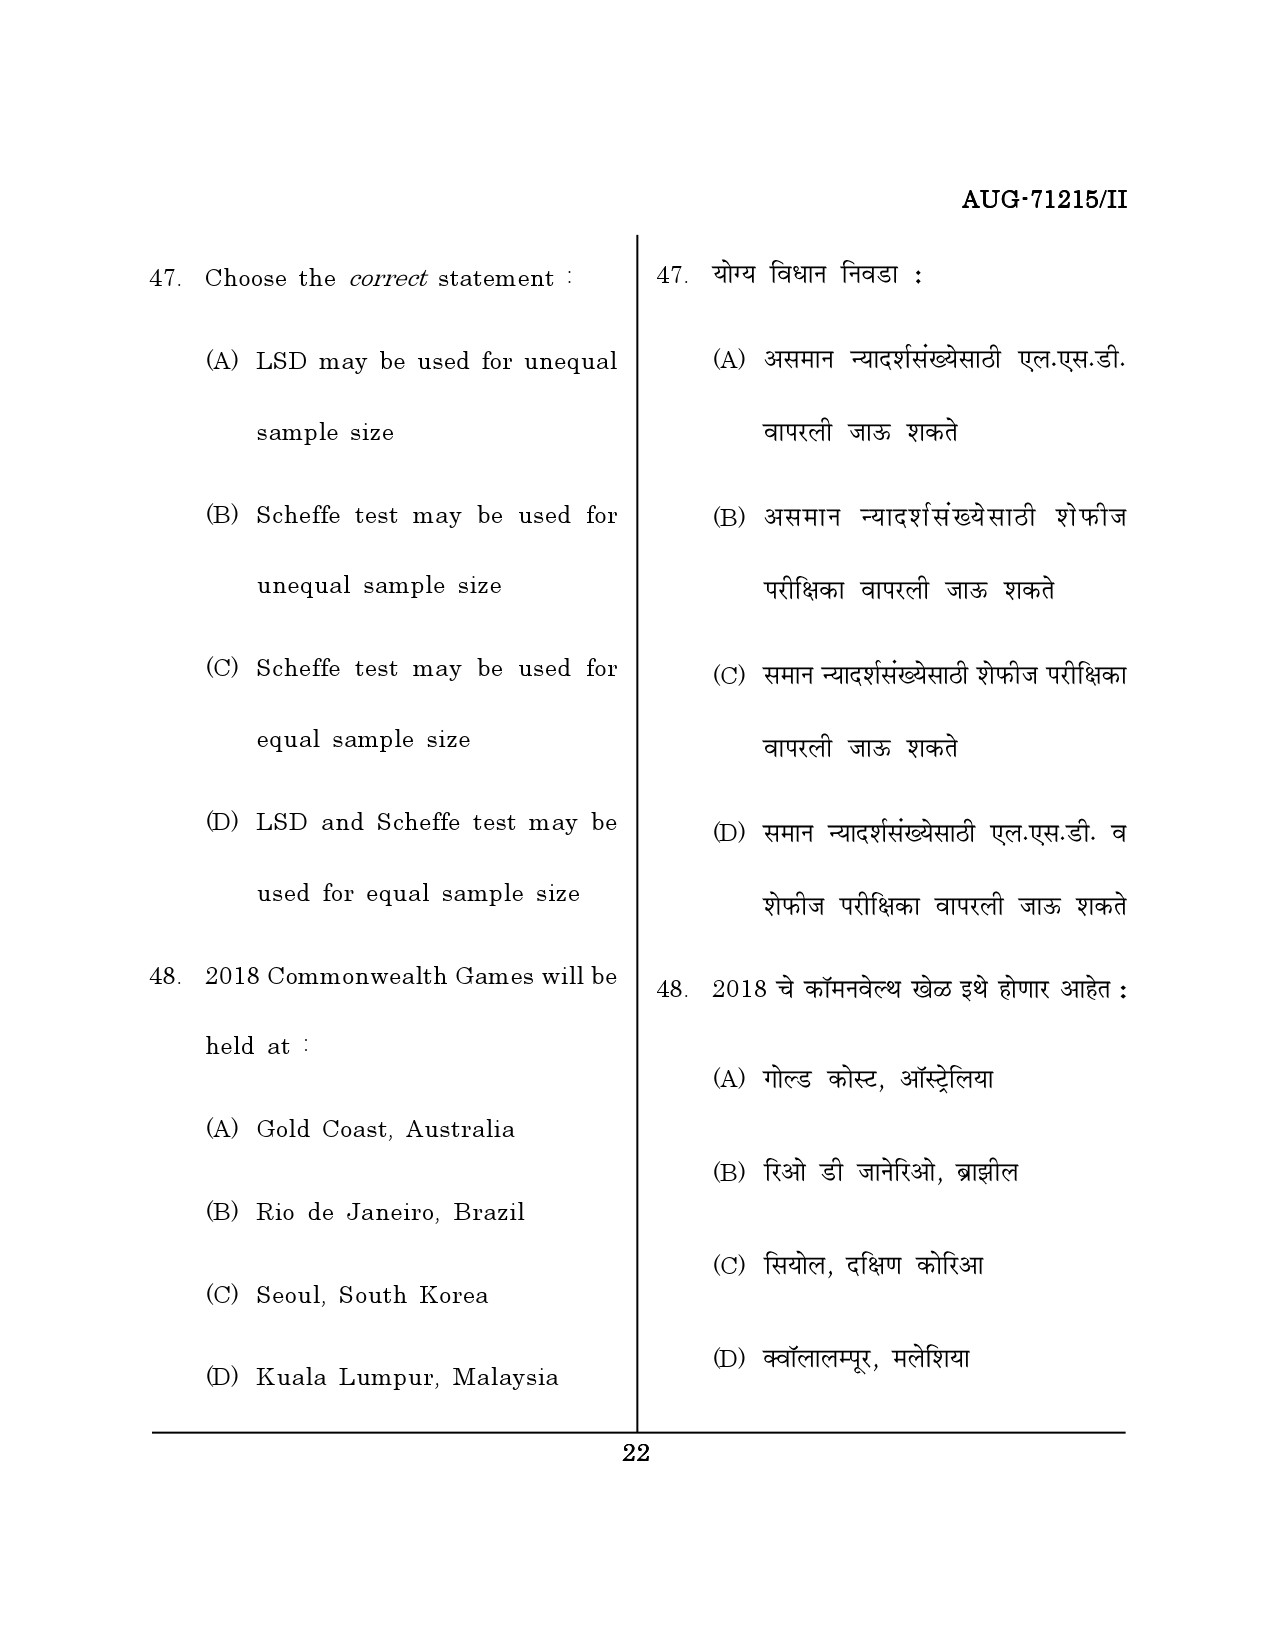 Maharashtra SET Physical Education Question Paper II August 2015 21